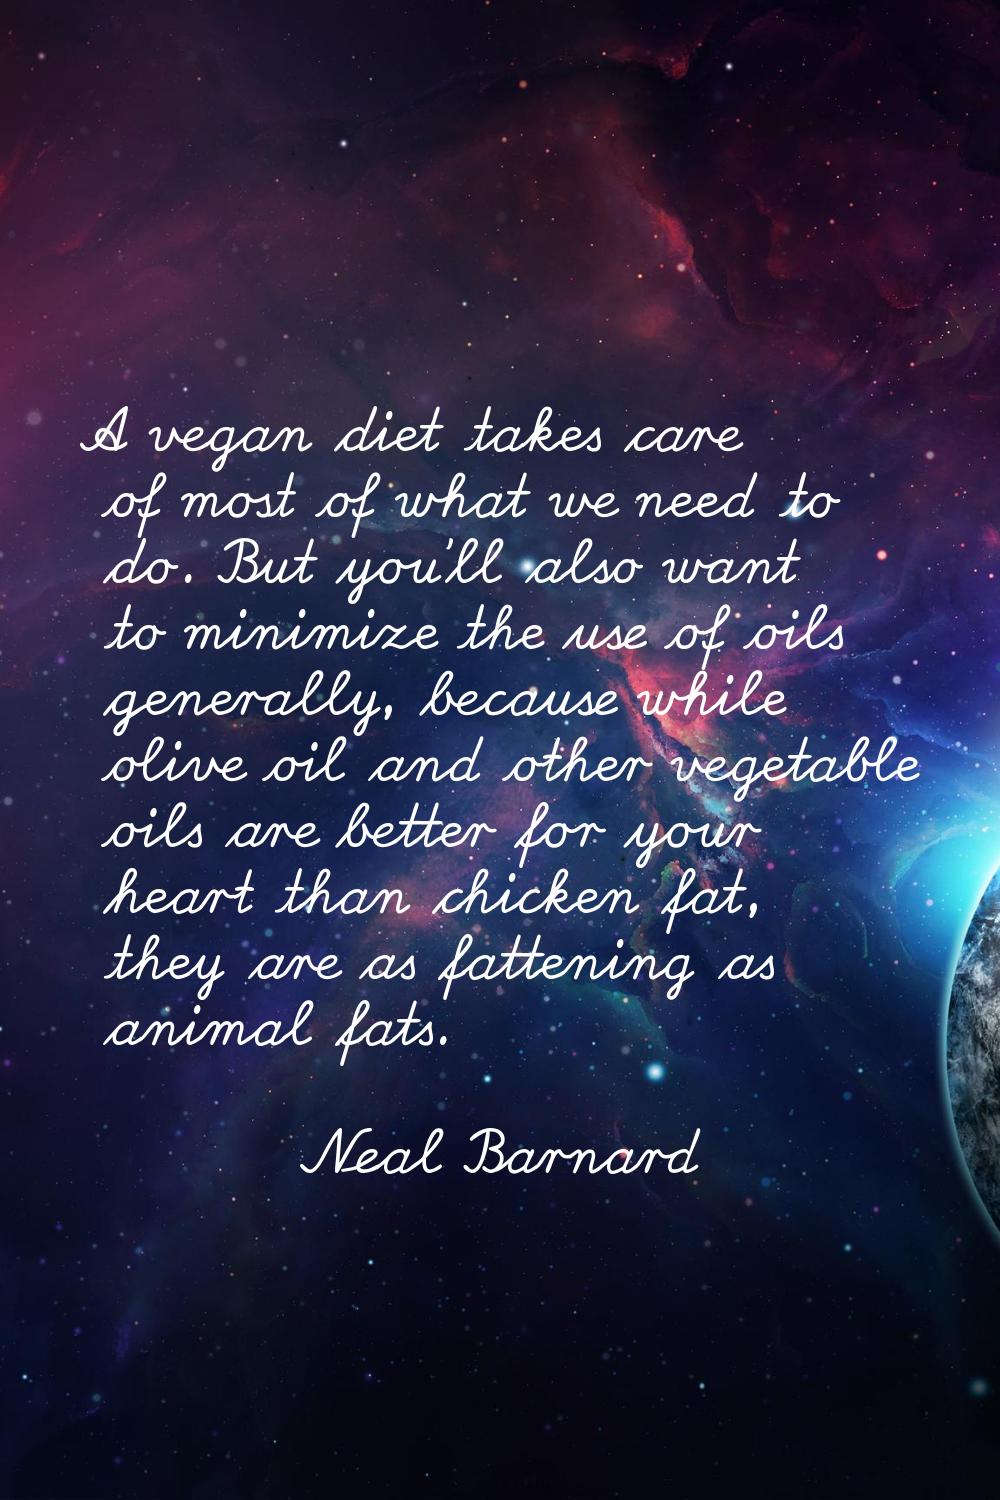 A vegan diet takes care of most of what we need to do. But you'll also want to minimize the use of 